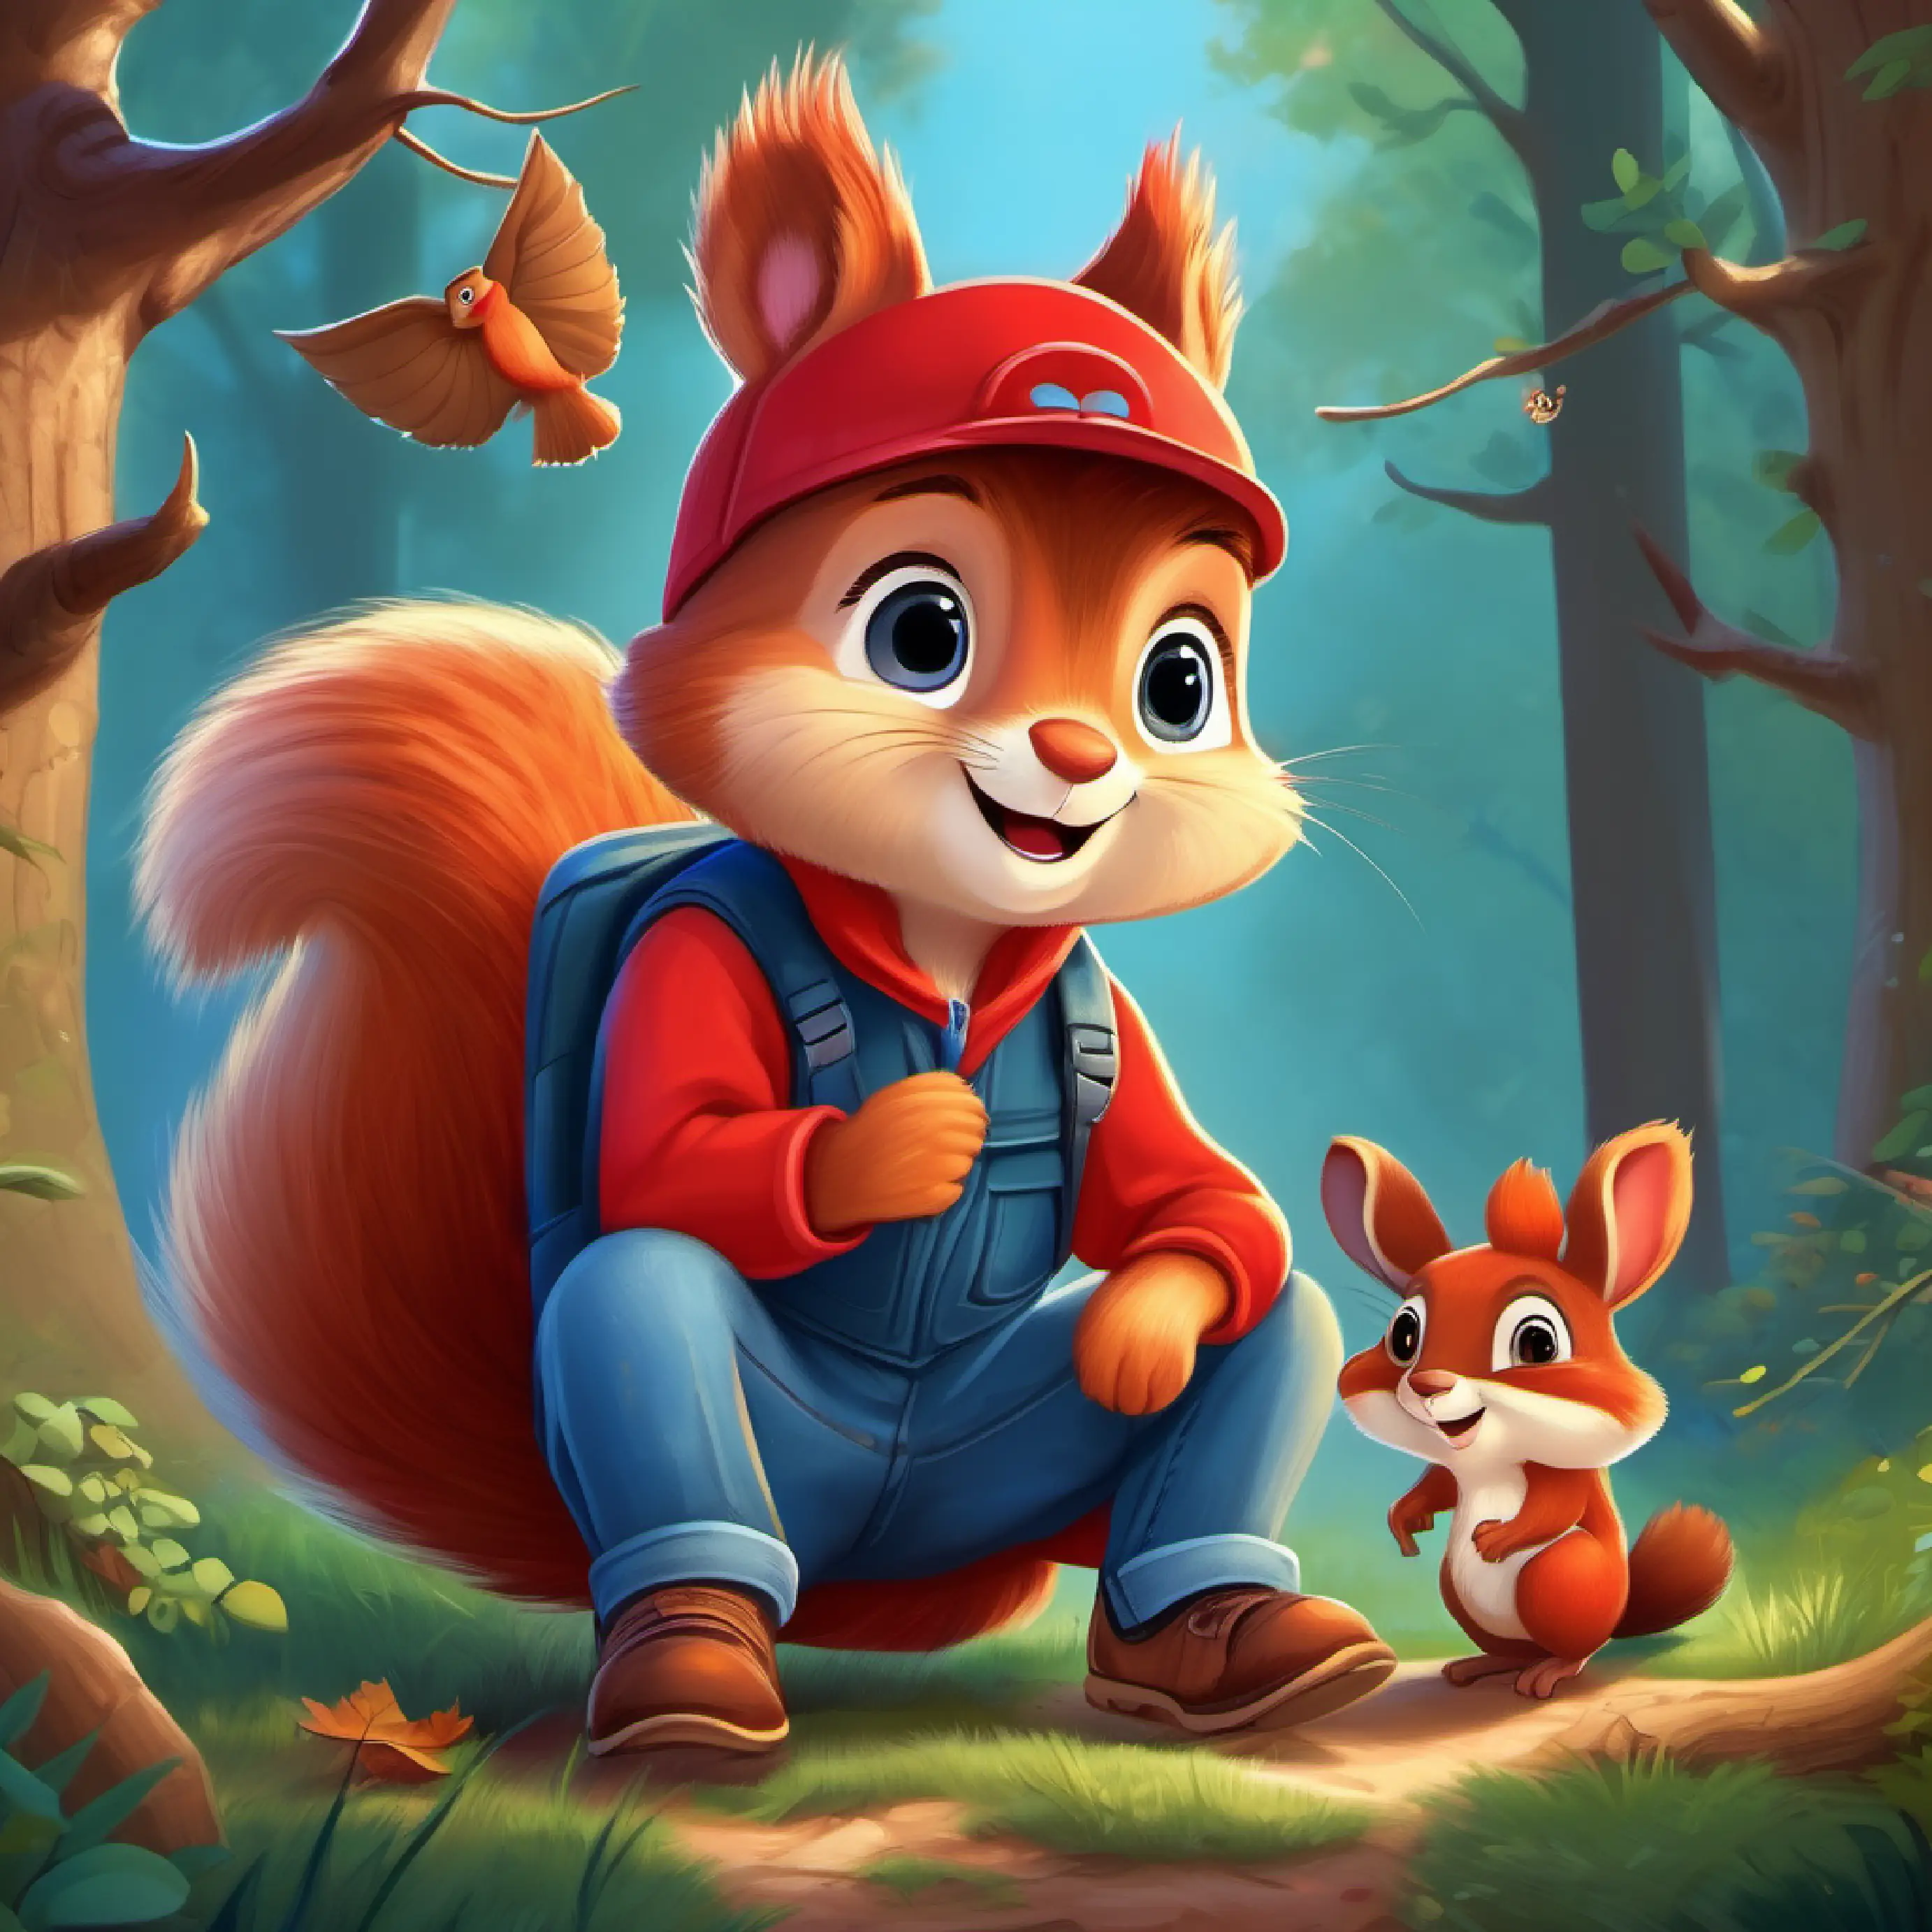 Brave boy, red cap, loves to explore, wears blue jeans, Friendly squirrel, big eyes, fluffy tail, likes giggling play games, call birds, woodland picnic